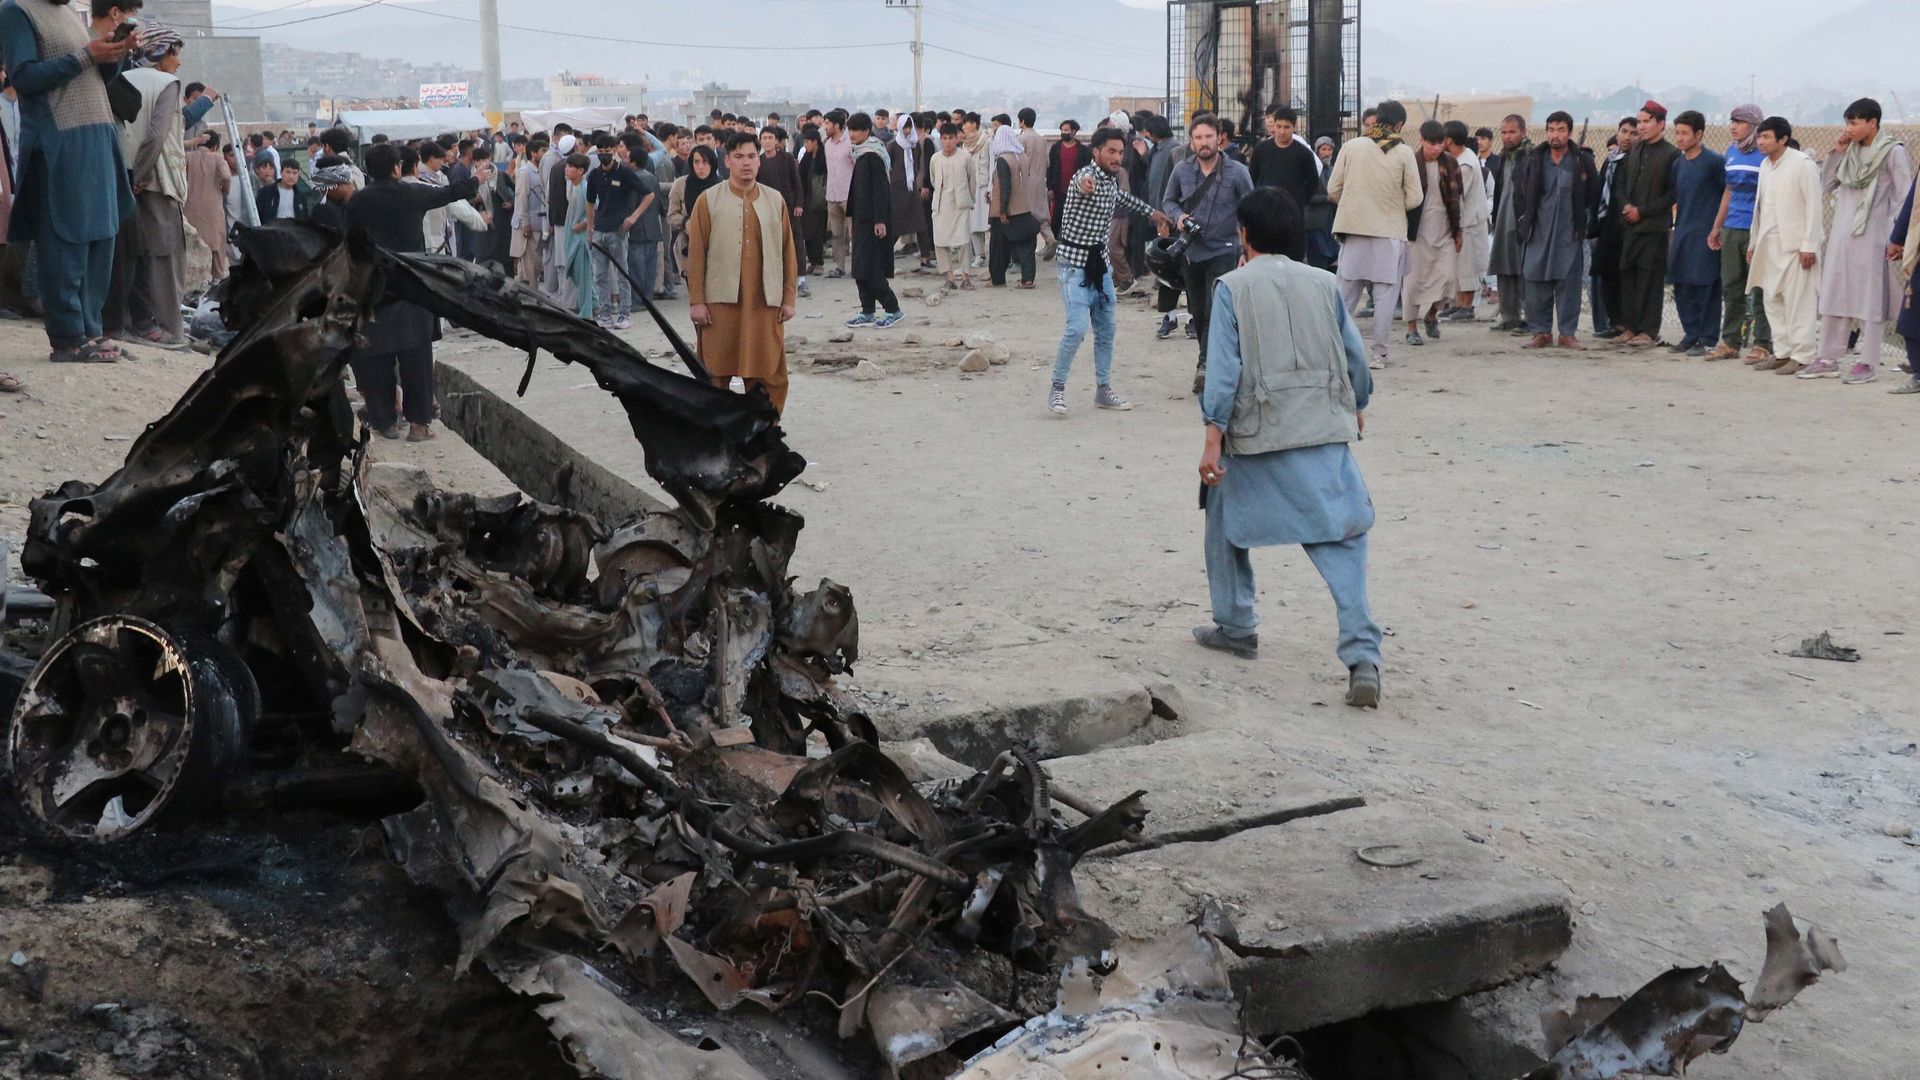  A view from the site after at least 30 people, mostly schoolgirls, have been killed in three back-to-back blasts targeting a school in Afghanistanâs capital Kabul on May 08, 2021.